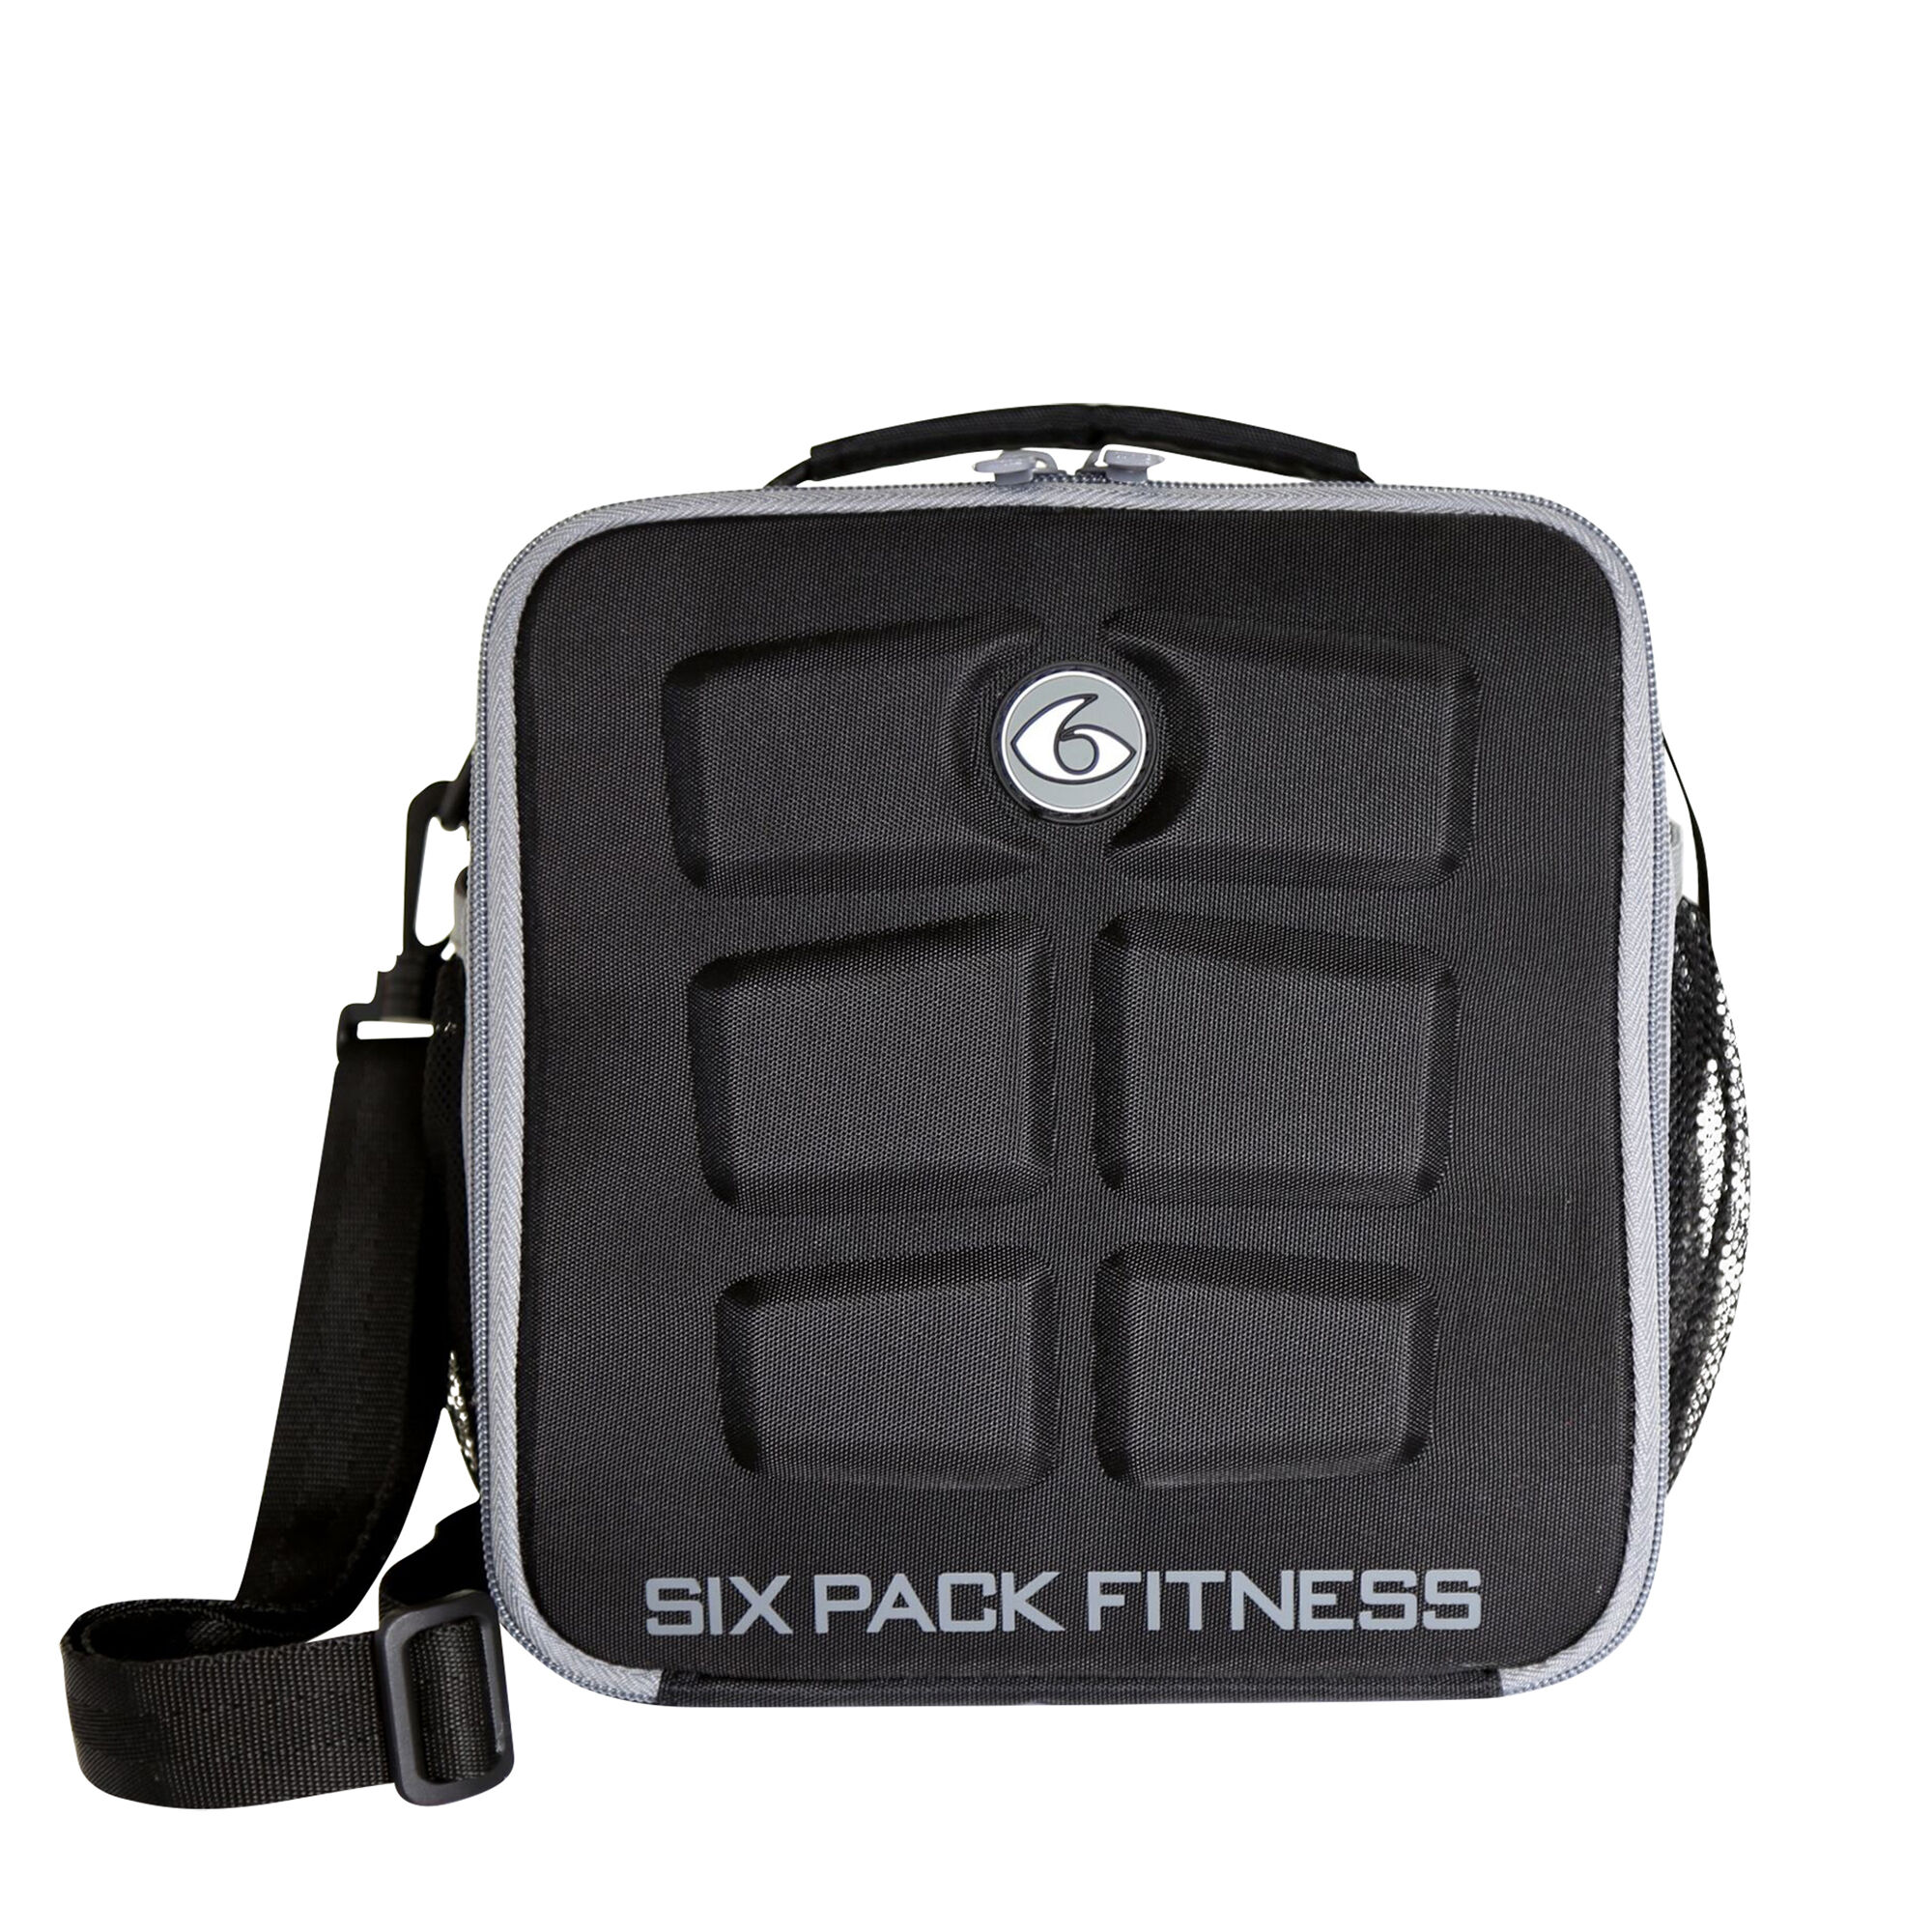 6 Pack Fitness™ Cube - Stealth | GNC